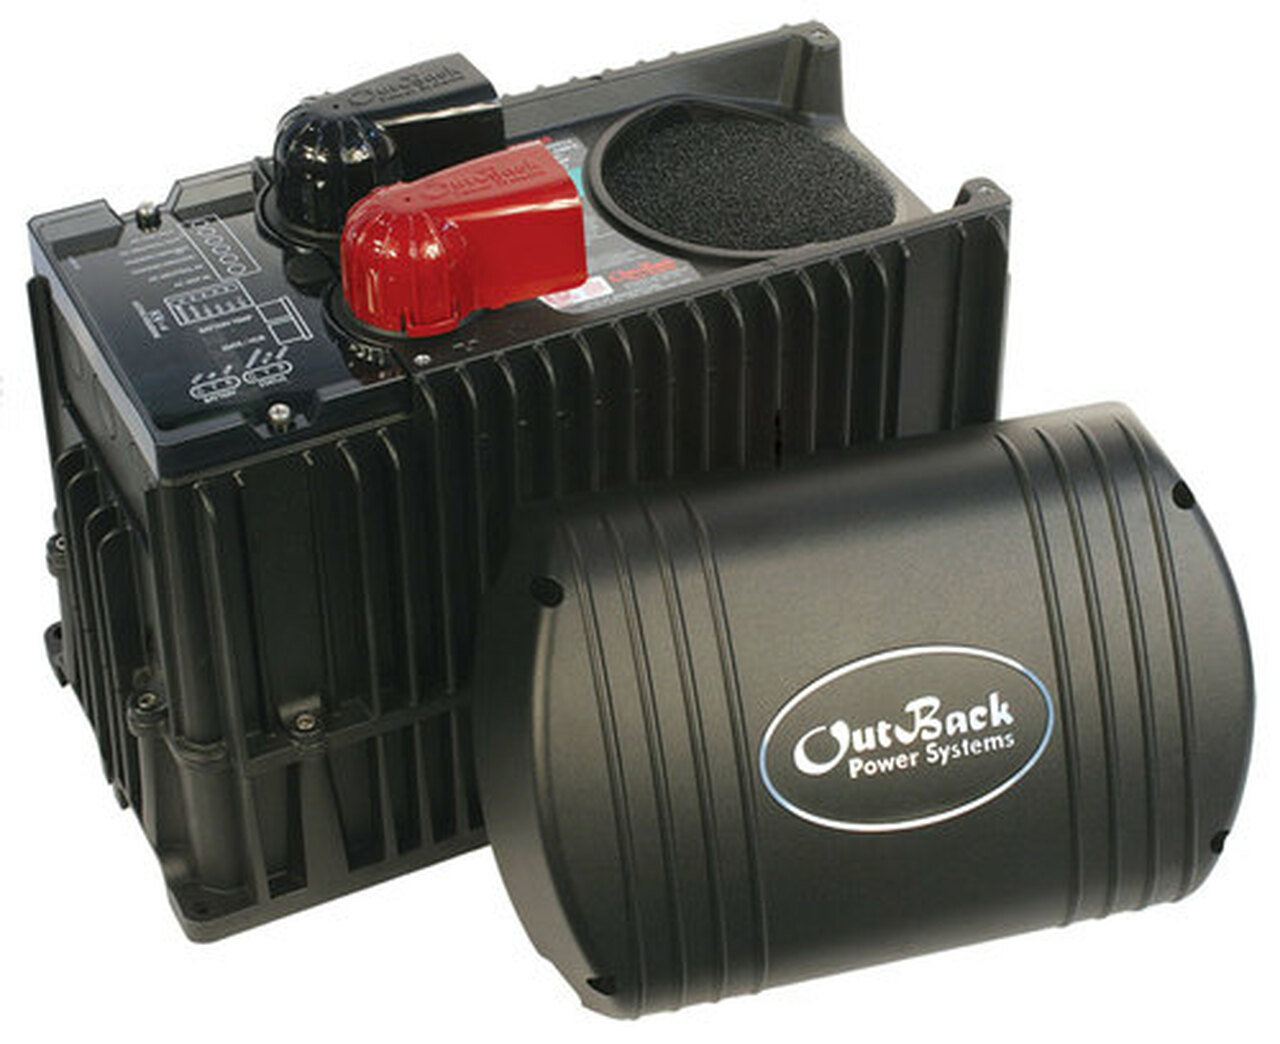 OutBack Power’s M-Series inverter/charger